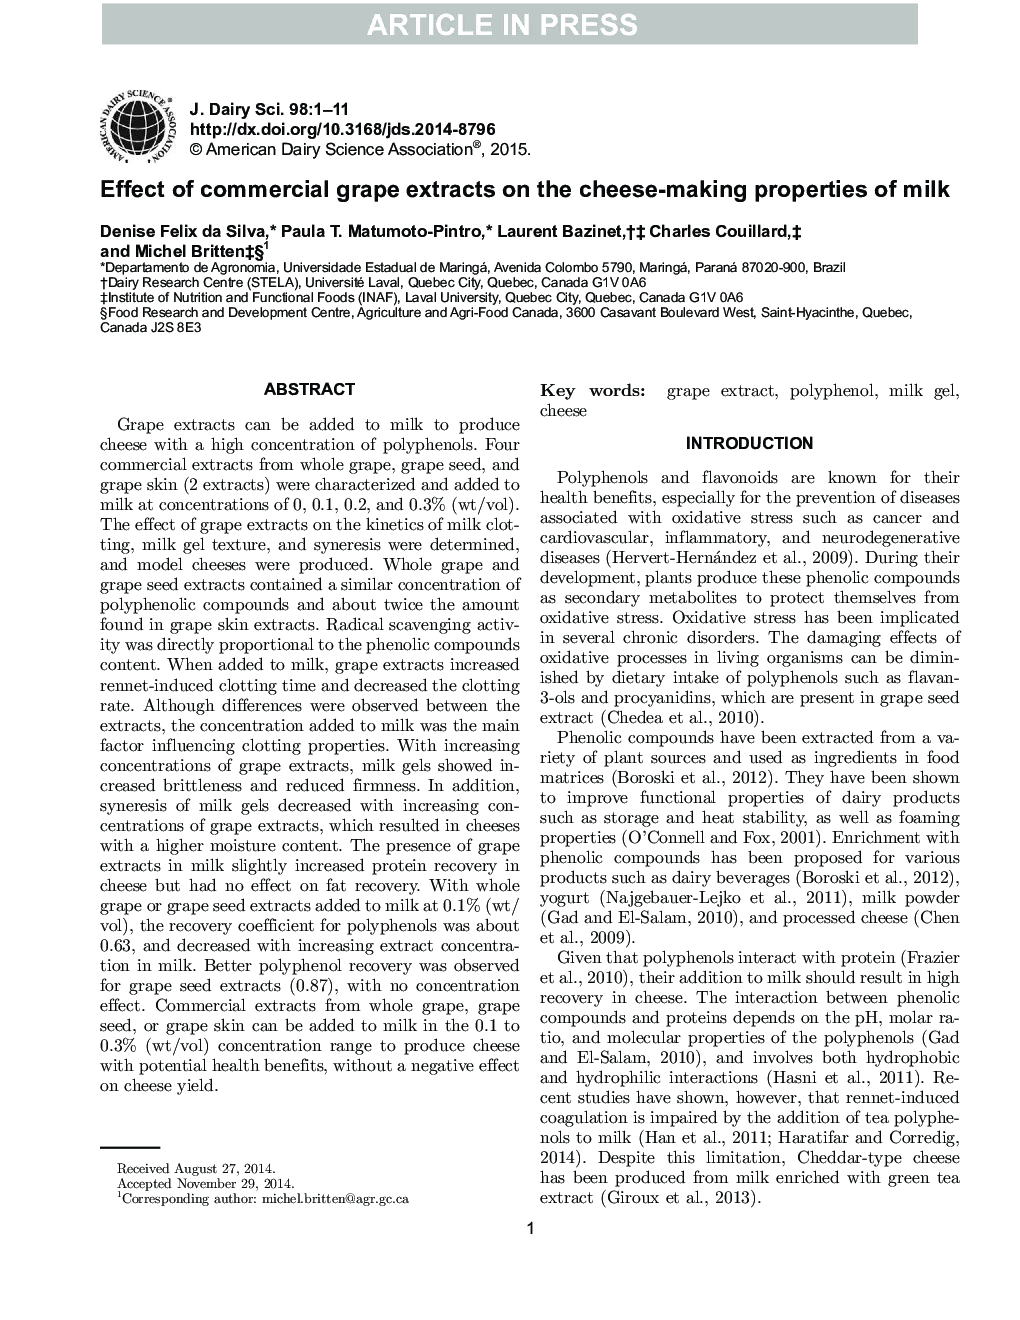 Effect of commercial grape extracts on the cheese-making properties of milk